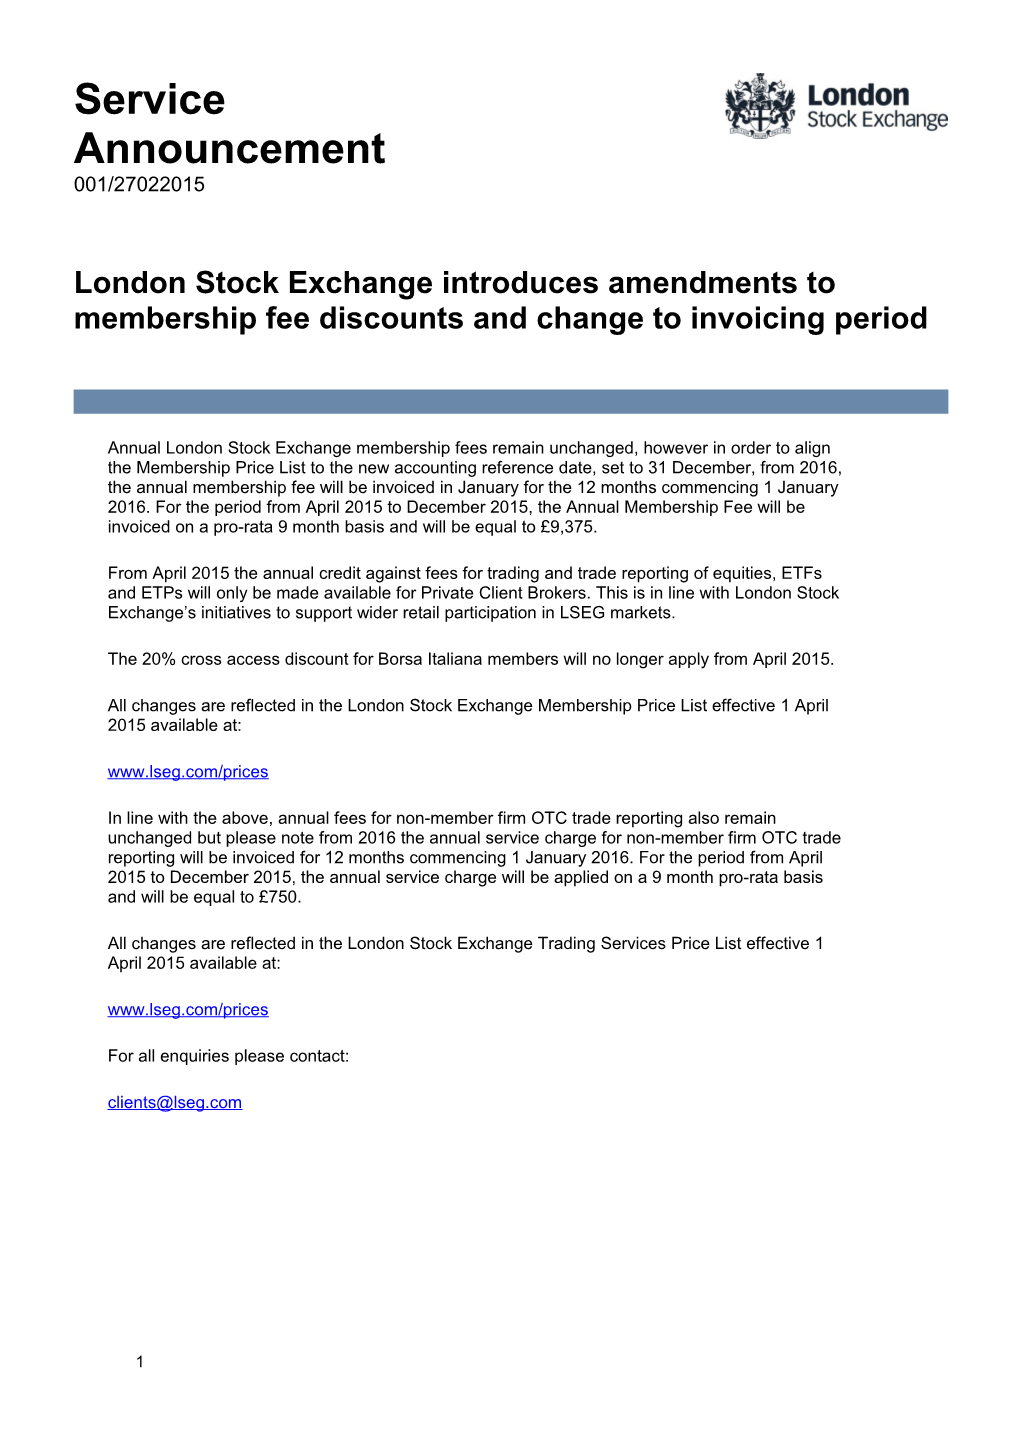 Annual London Stock Exchange Membership Fees Remain Unchanged, However in Order to Align